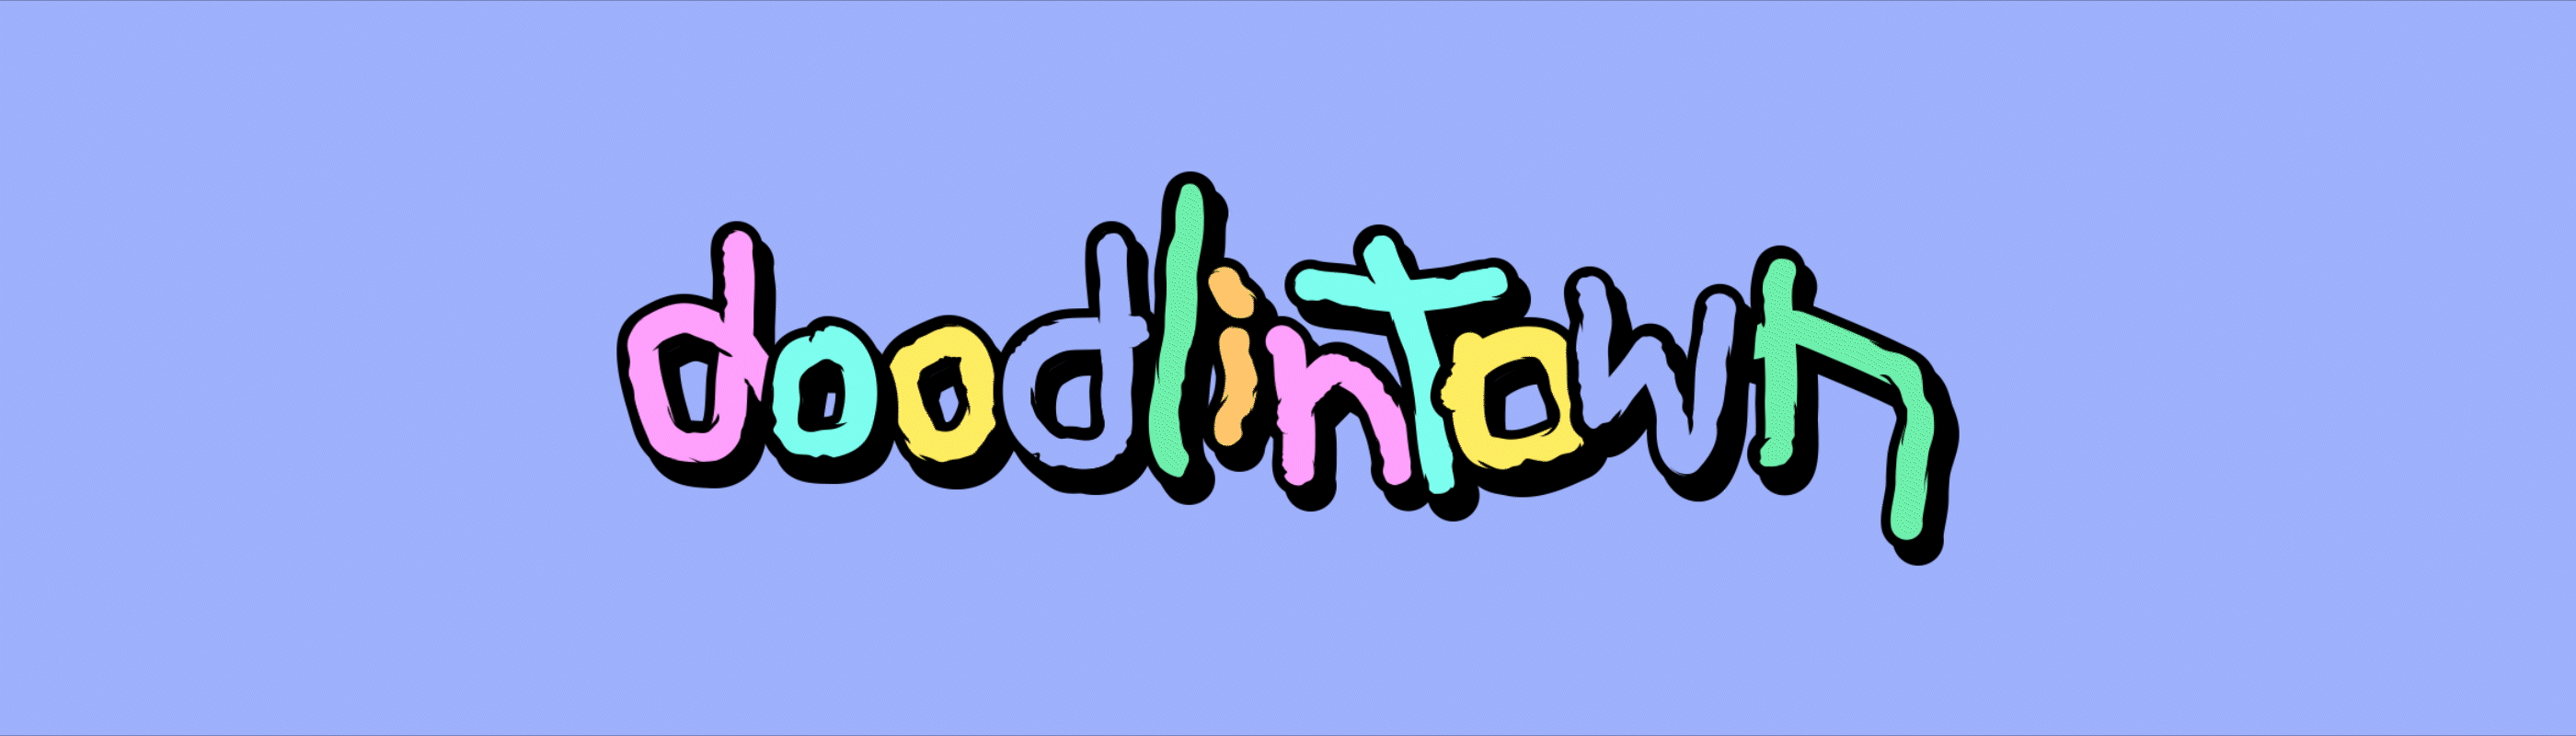 Doodlin-Town-Collection banner